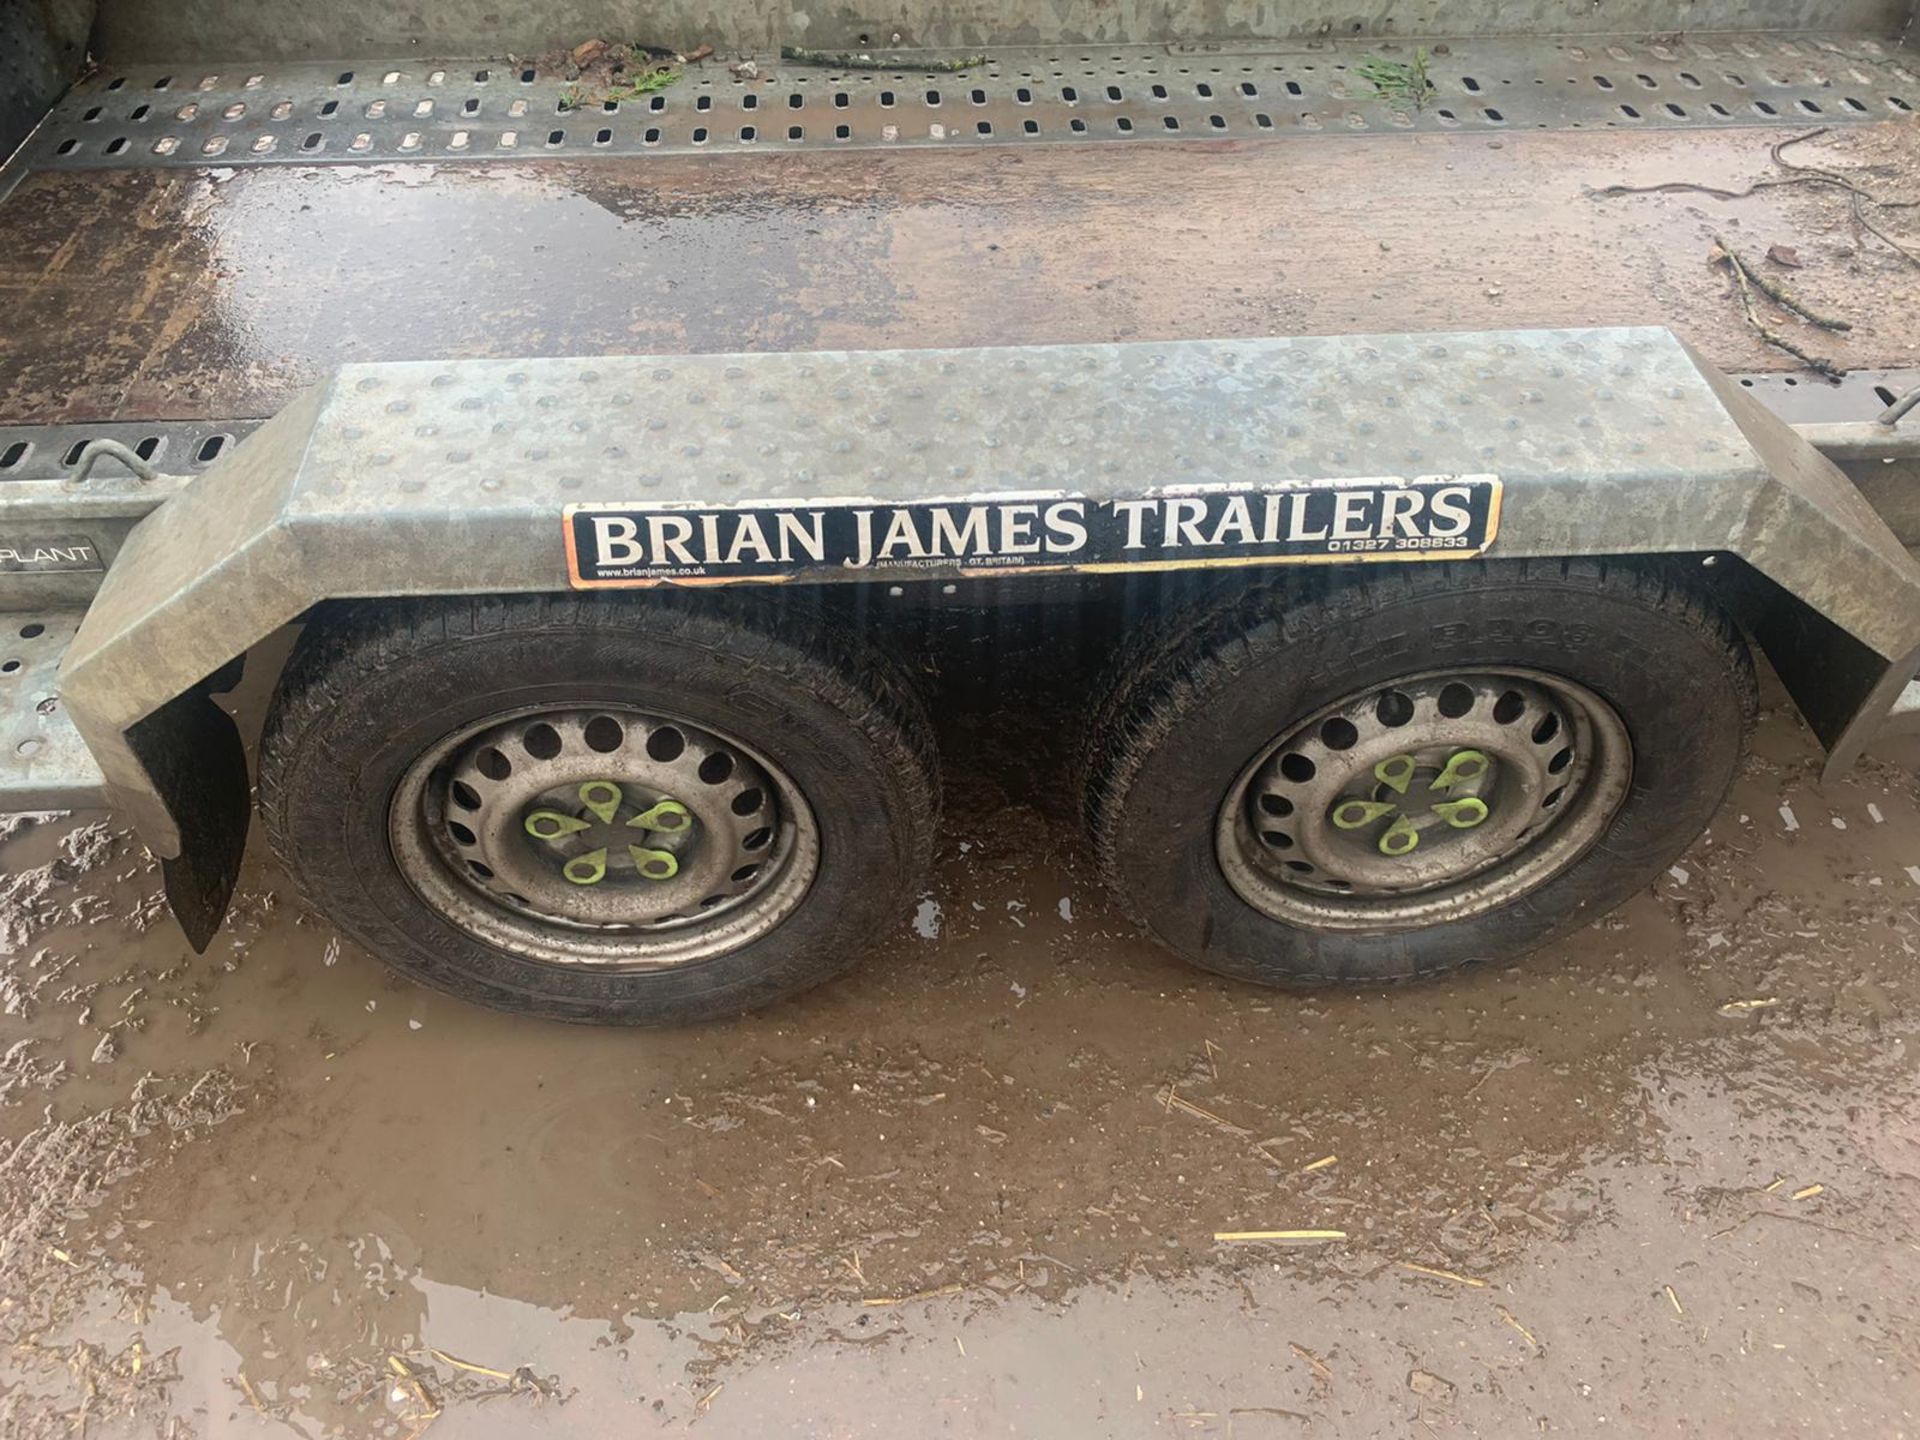 2015 BRIAN JAMES 2.7 TON PLANT TRAILER, 8 x4, IN VERY GOOD CONDITION *PLUS VAT* - Image 9 of 10